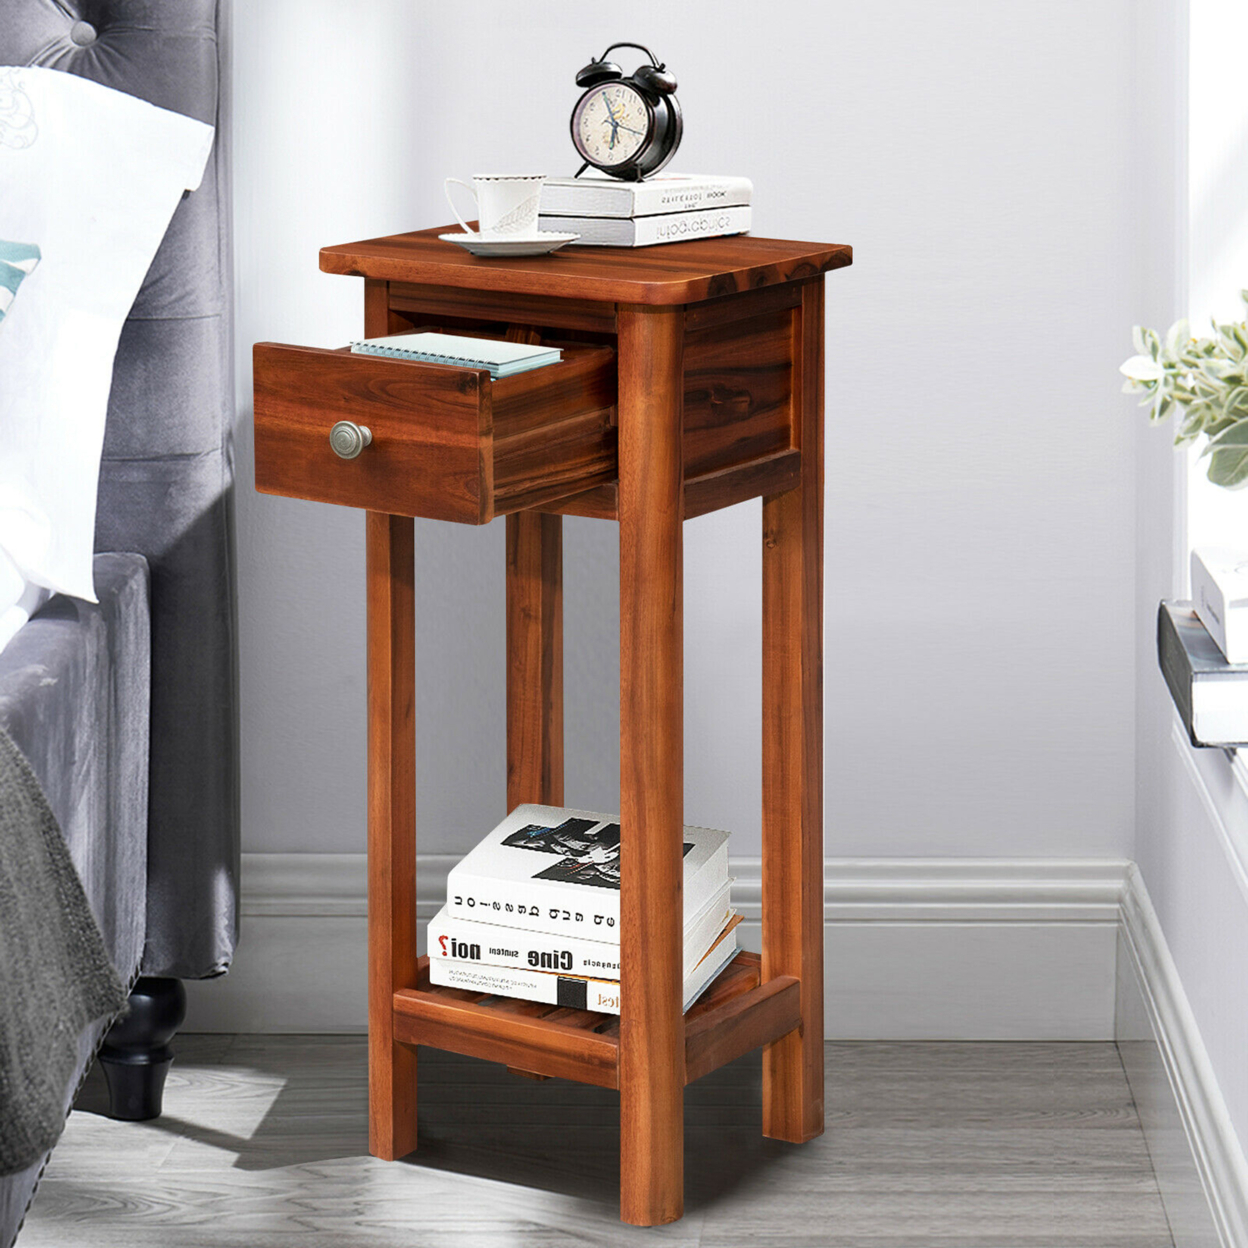 2PCS 2 Tier End Bedside Sofa Side Table With Drawer Shelf Acacia Wood Nightstand